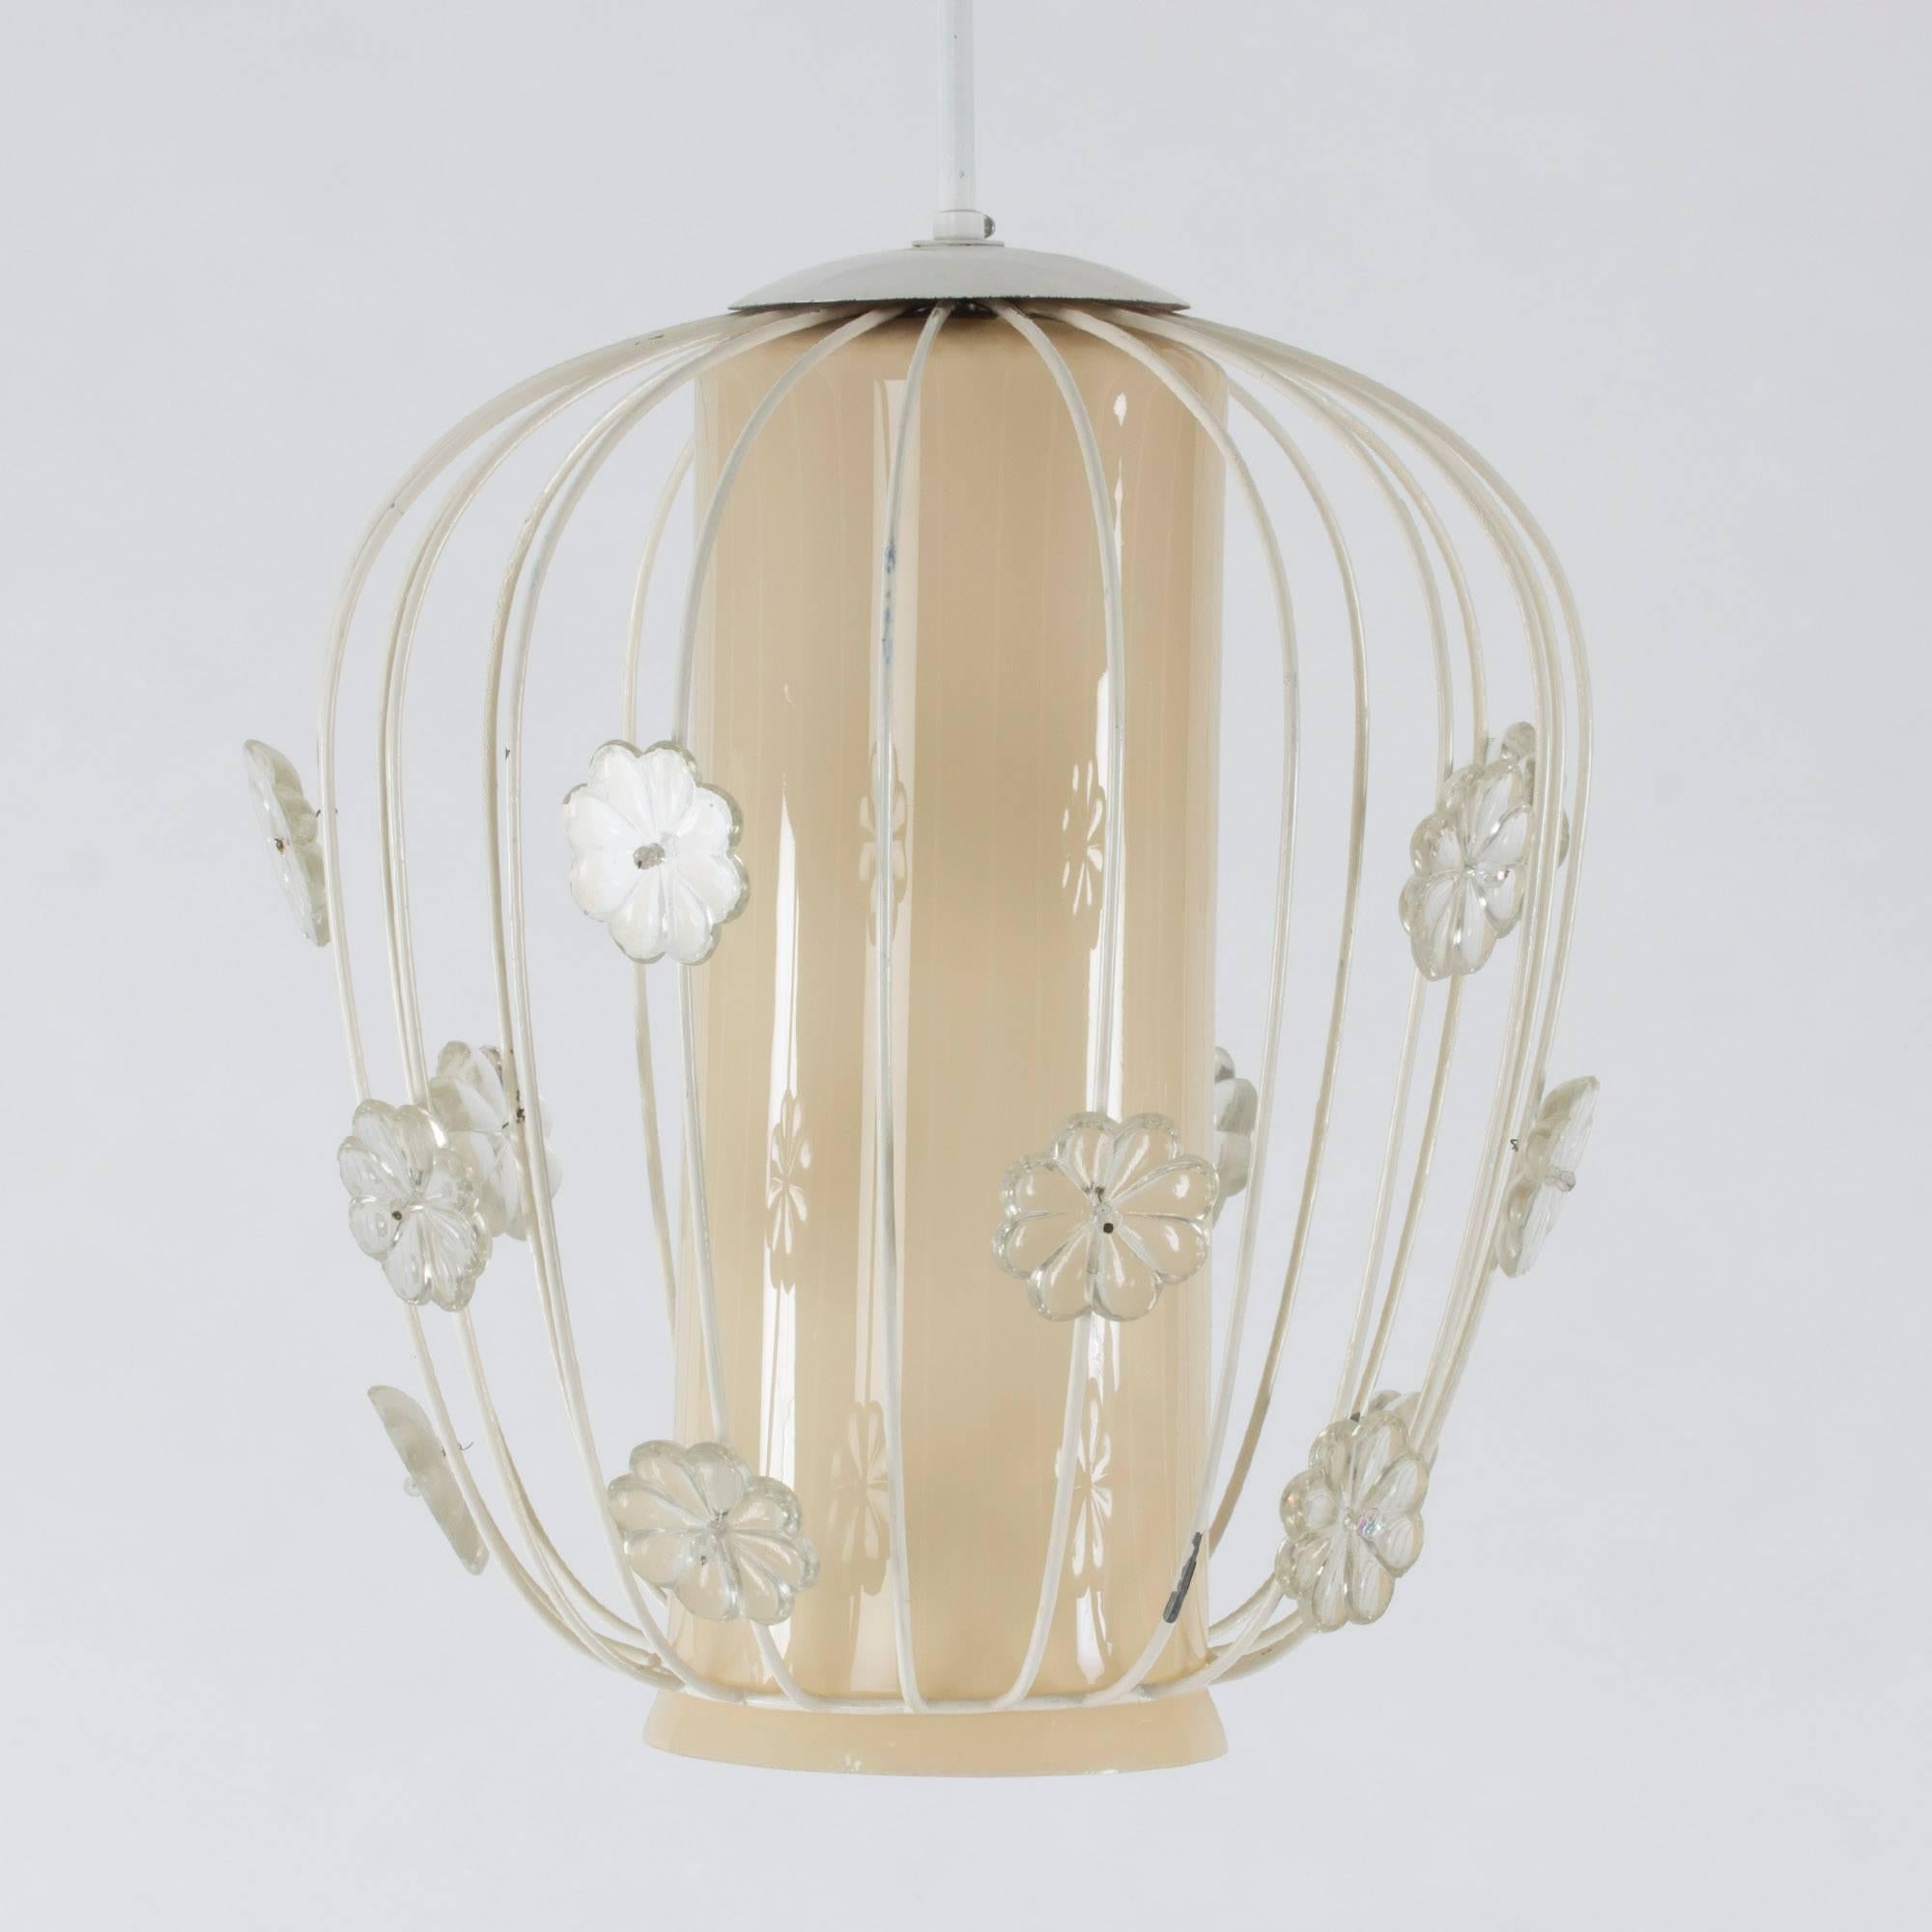 Beautiful 1950s ceiling lamp with a glass center enclosed by an off-white lacquered cage with appliqued glass flowers around the body.